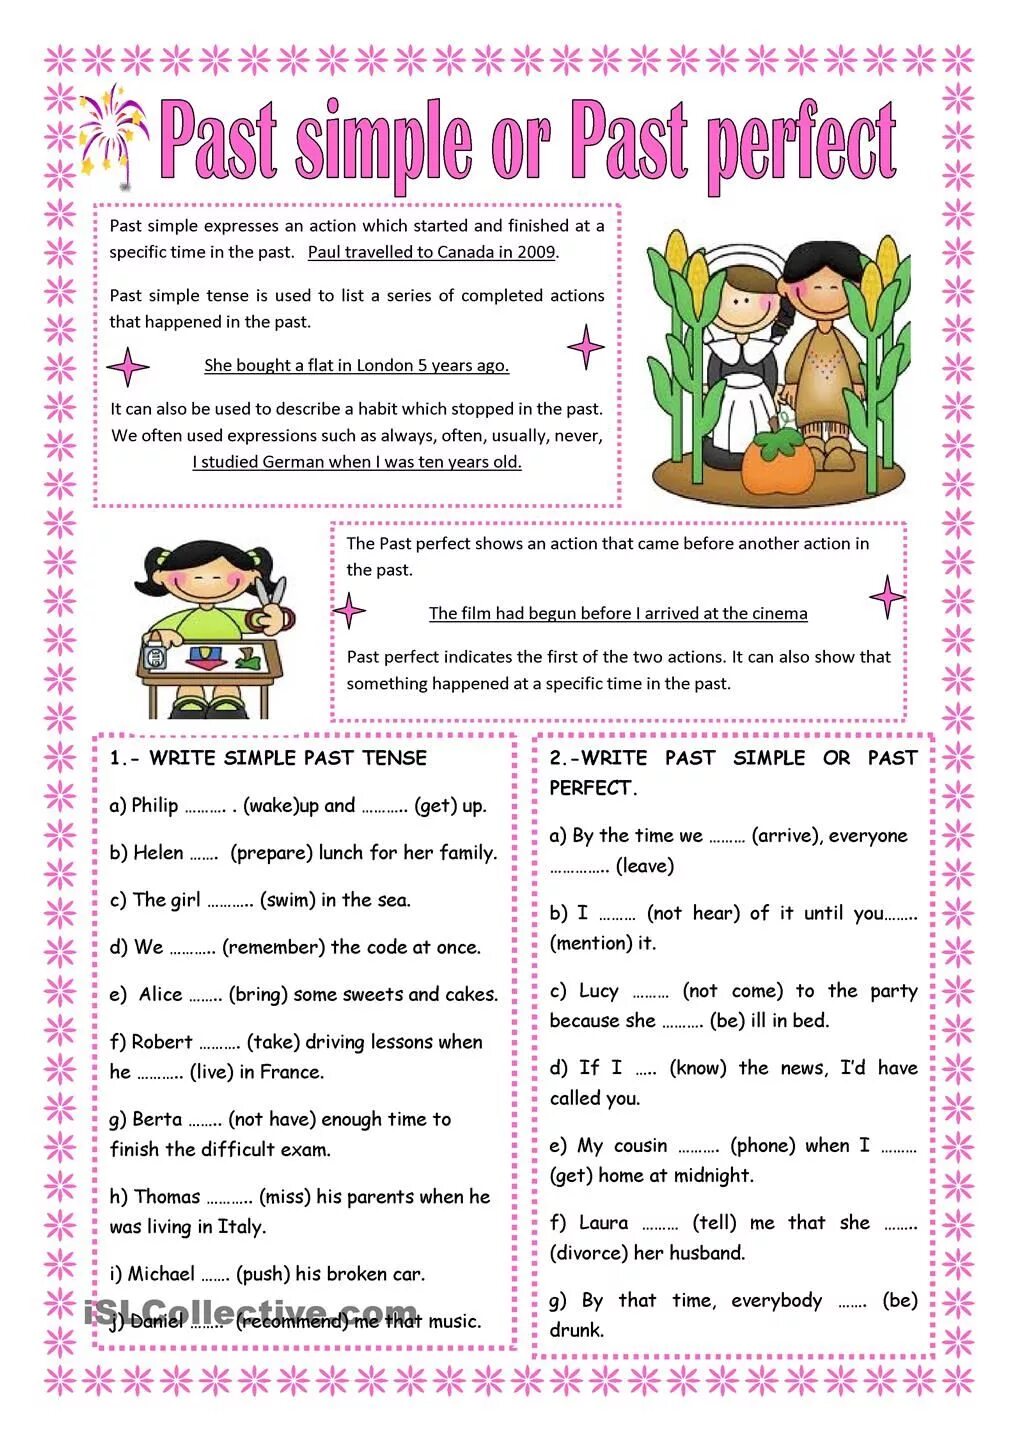 Past simple vs past perfect Worksheets. Present perfect past simple упражнения. Past simple present perfect past perfect упражнения. Present perfect vs past simple exercise